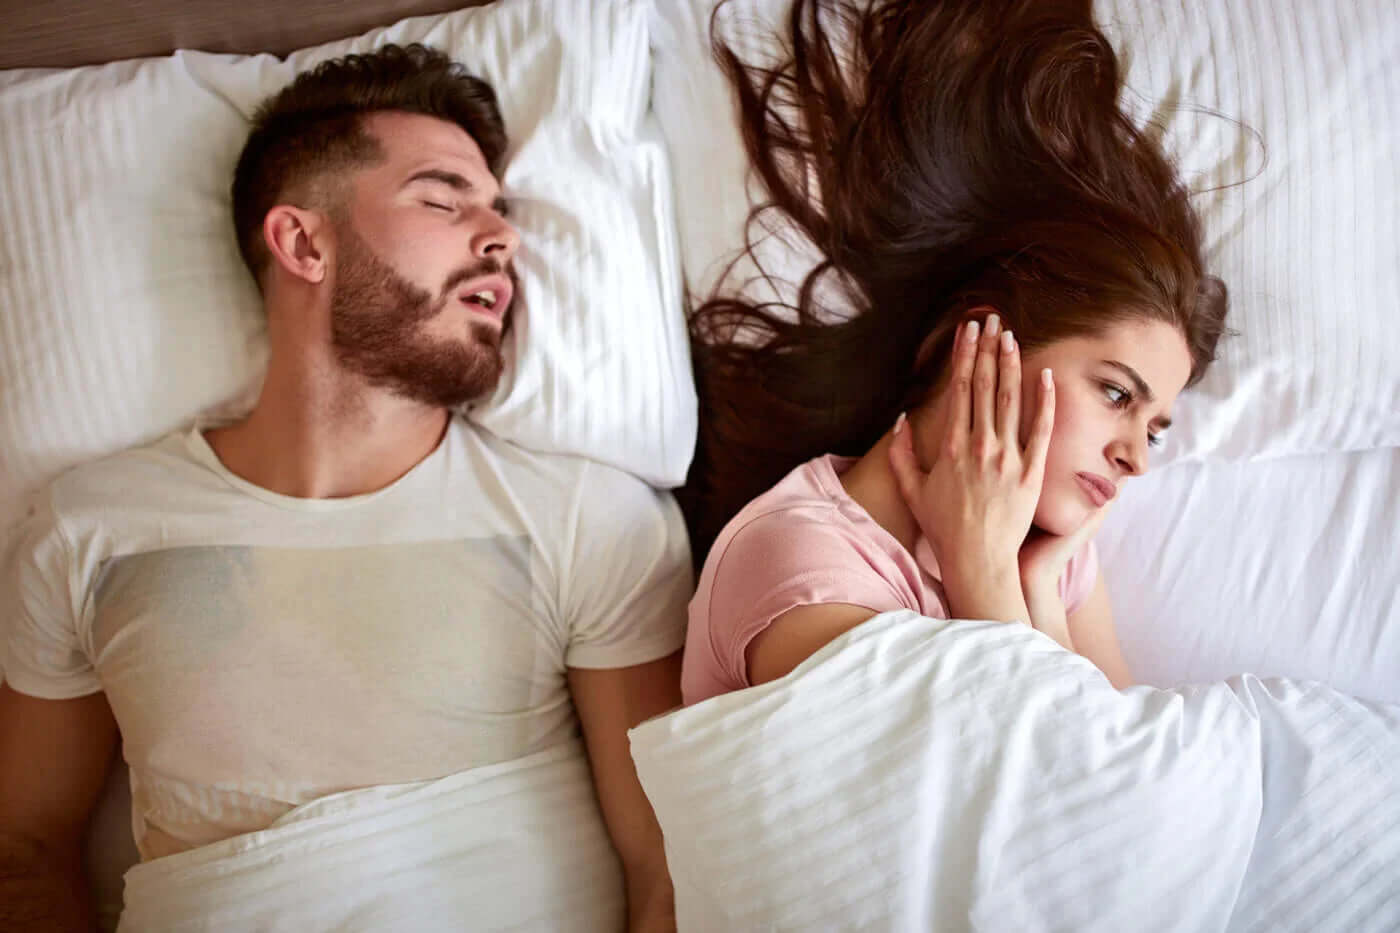 If I snore, does it mean that I suffer from sleep apnea?